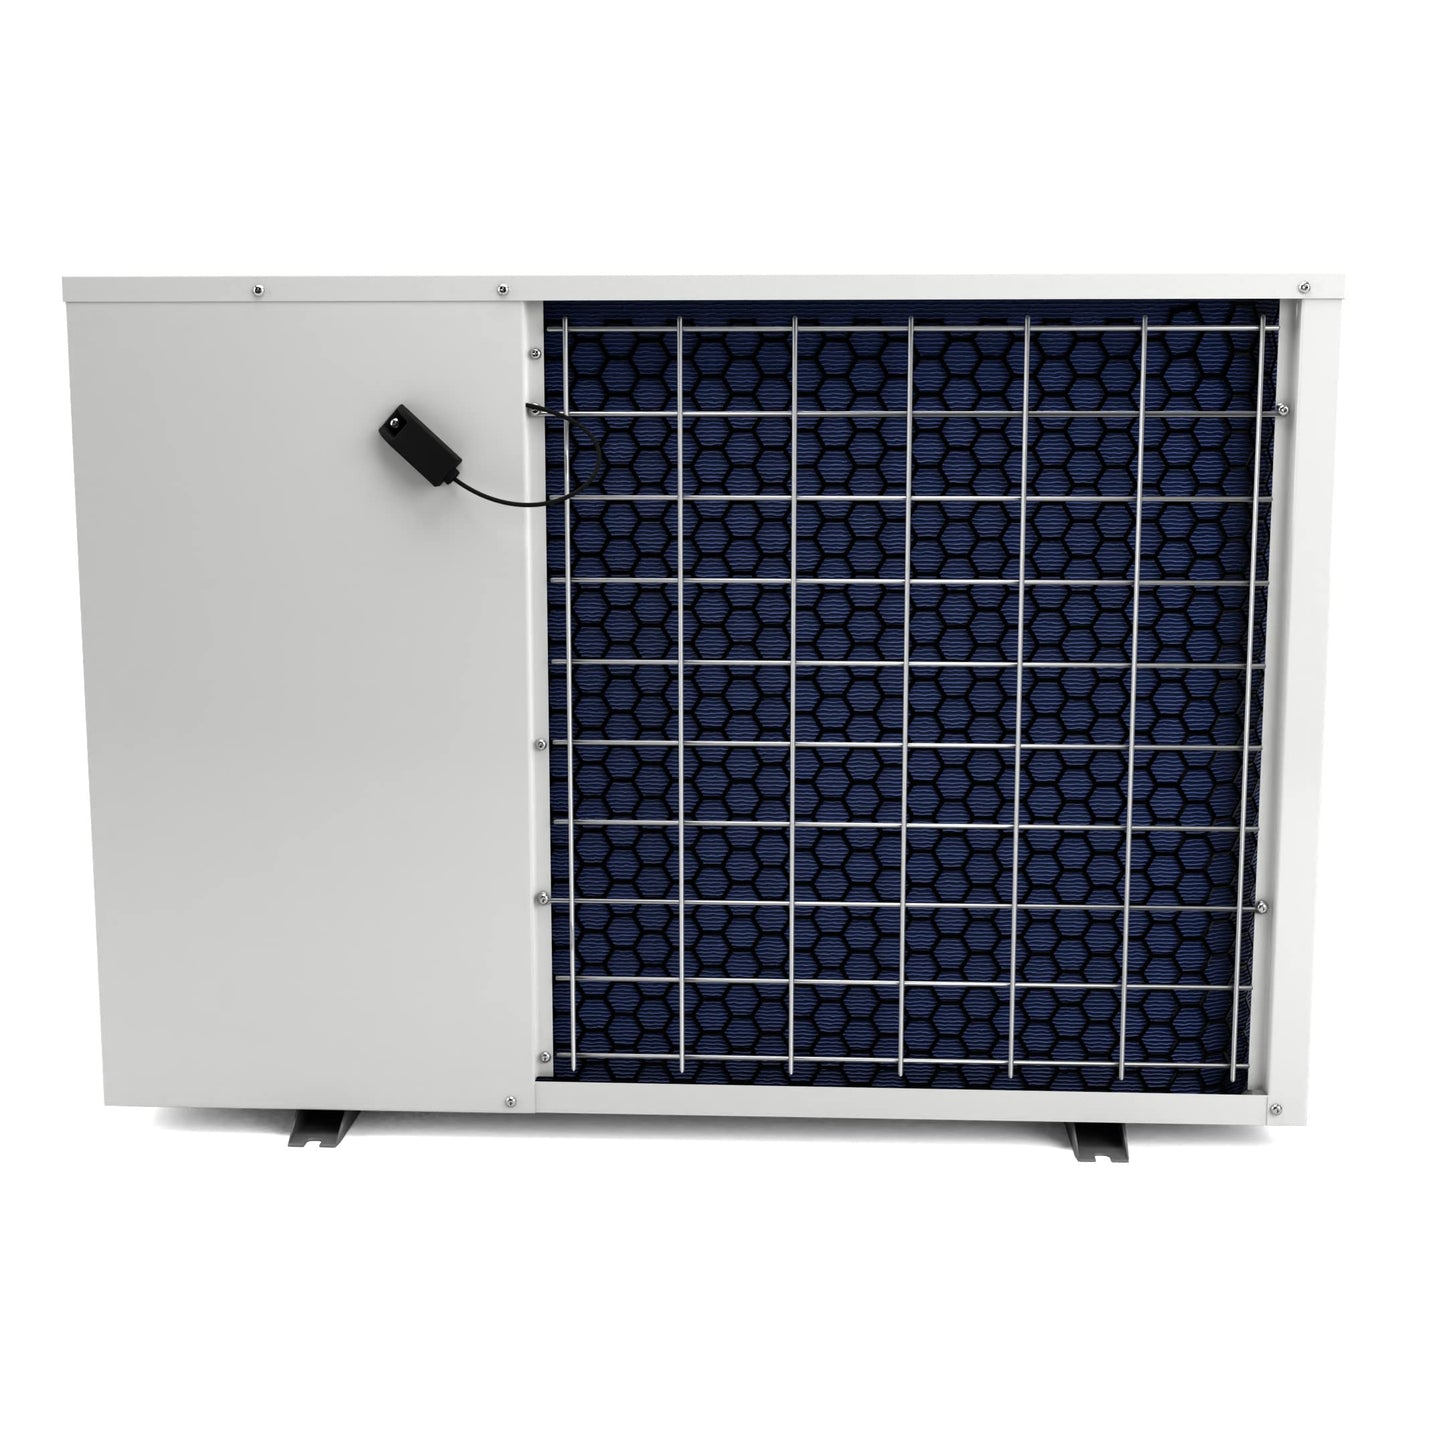 FibroPool Swimming Pool Heat Pump - FH270 70,000 BTU - for Above and In Ground Pools and Spas - High Efficiency, All Electric Heater - No Natural Gas or Propane Needed